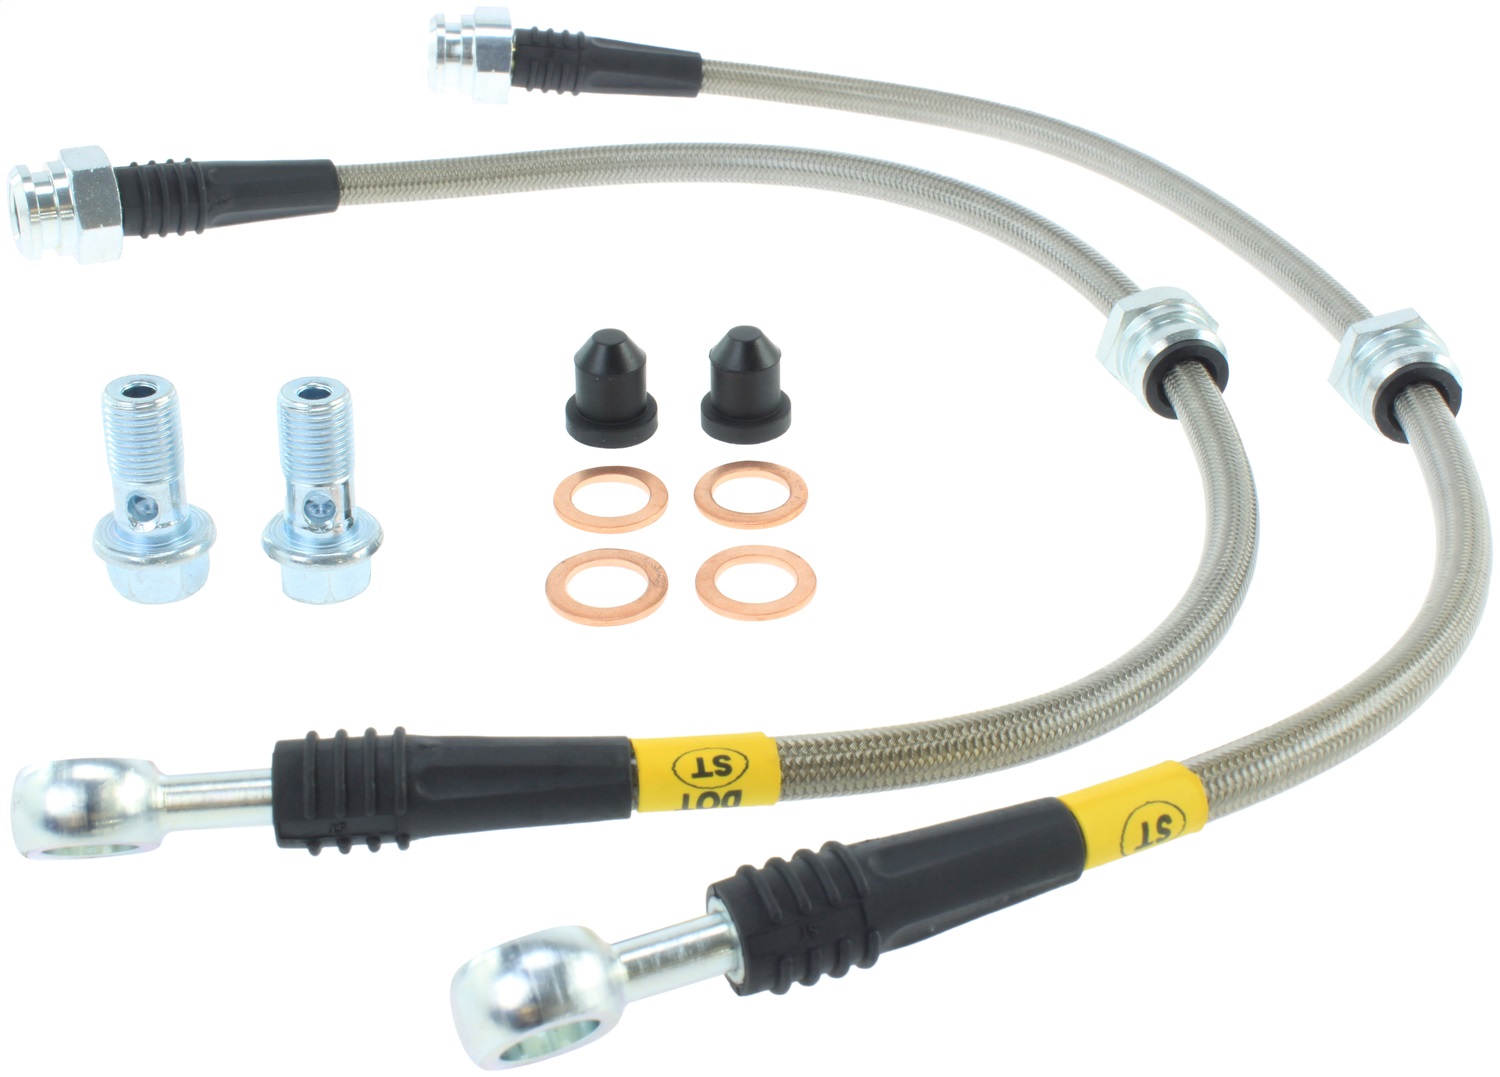 StopTech 950.45002 Stainless Steel Hose Set Fits 99-03 Protege Protege5